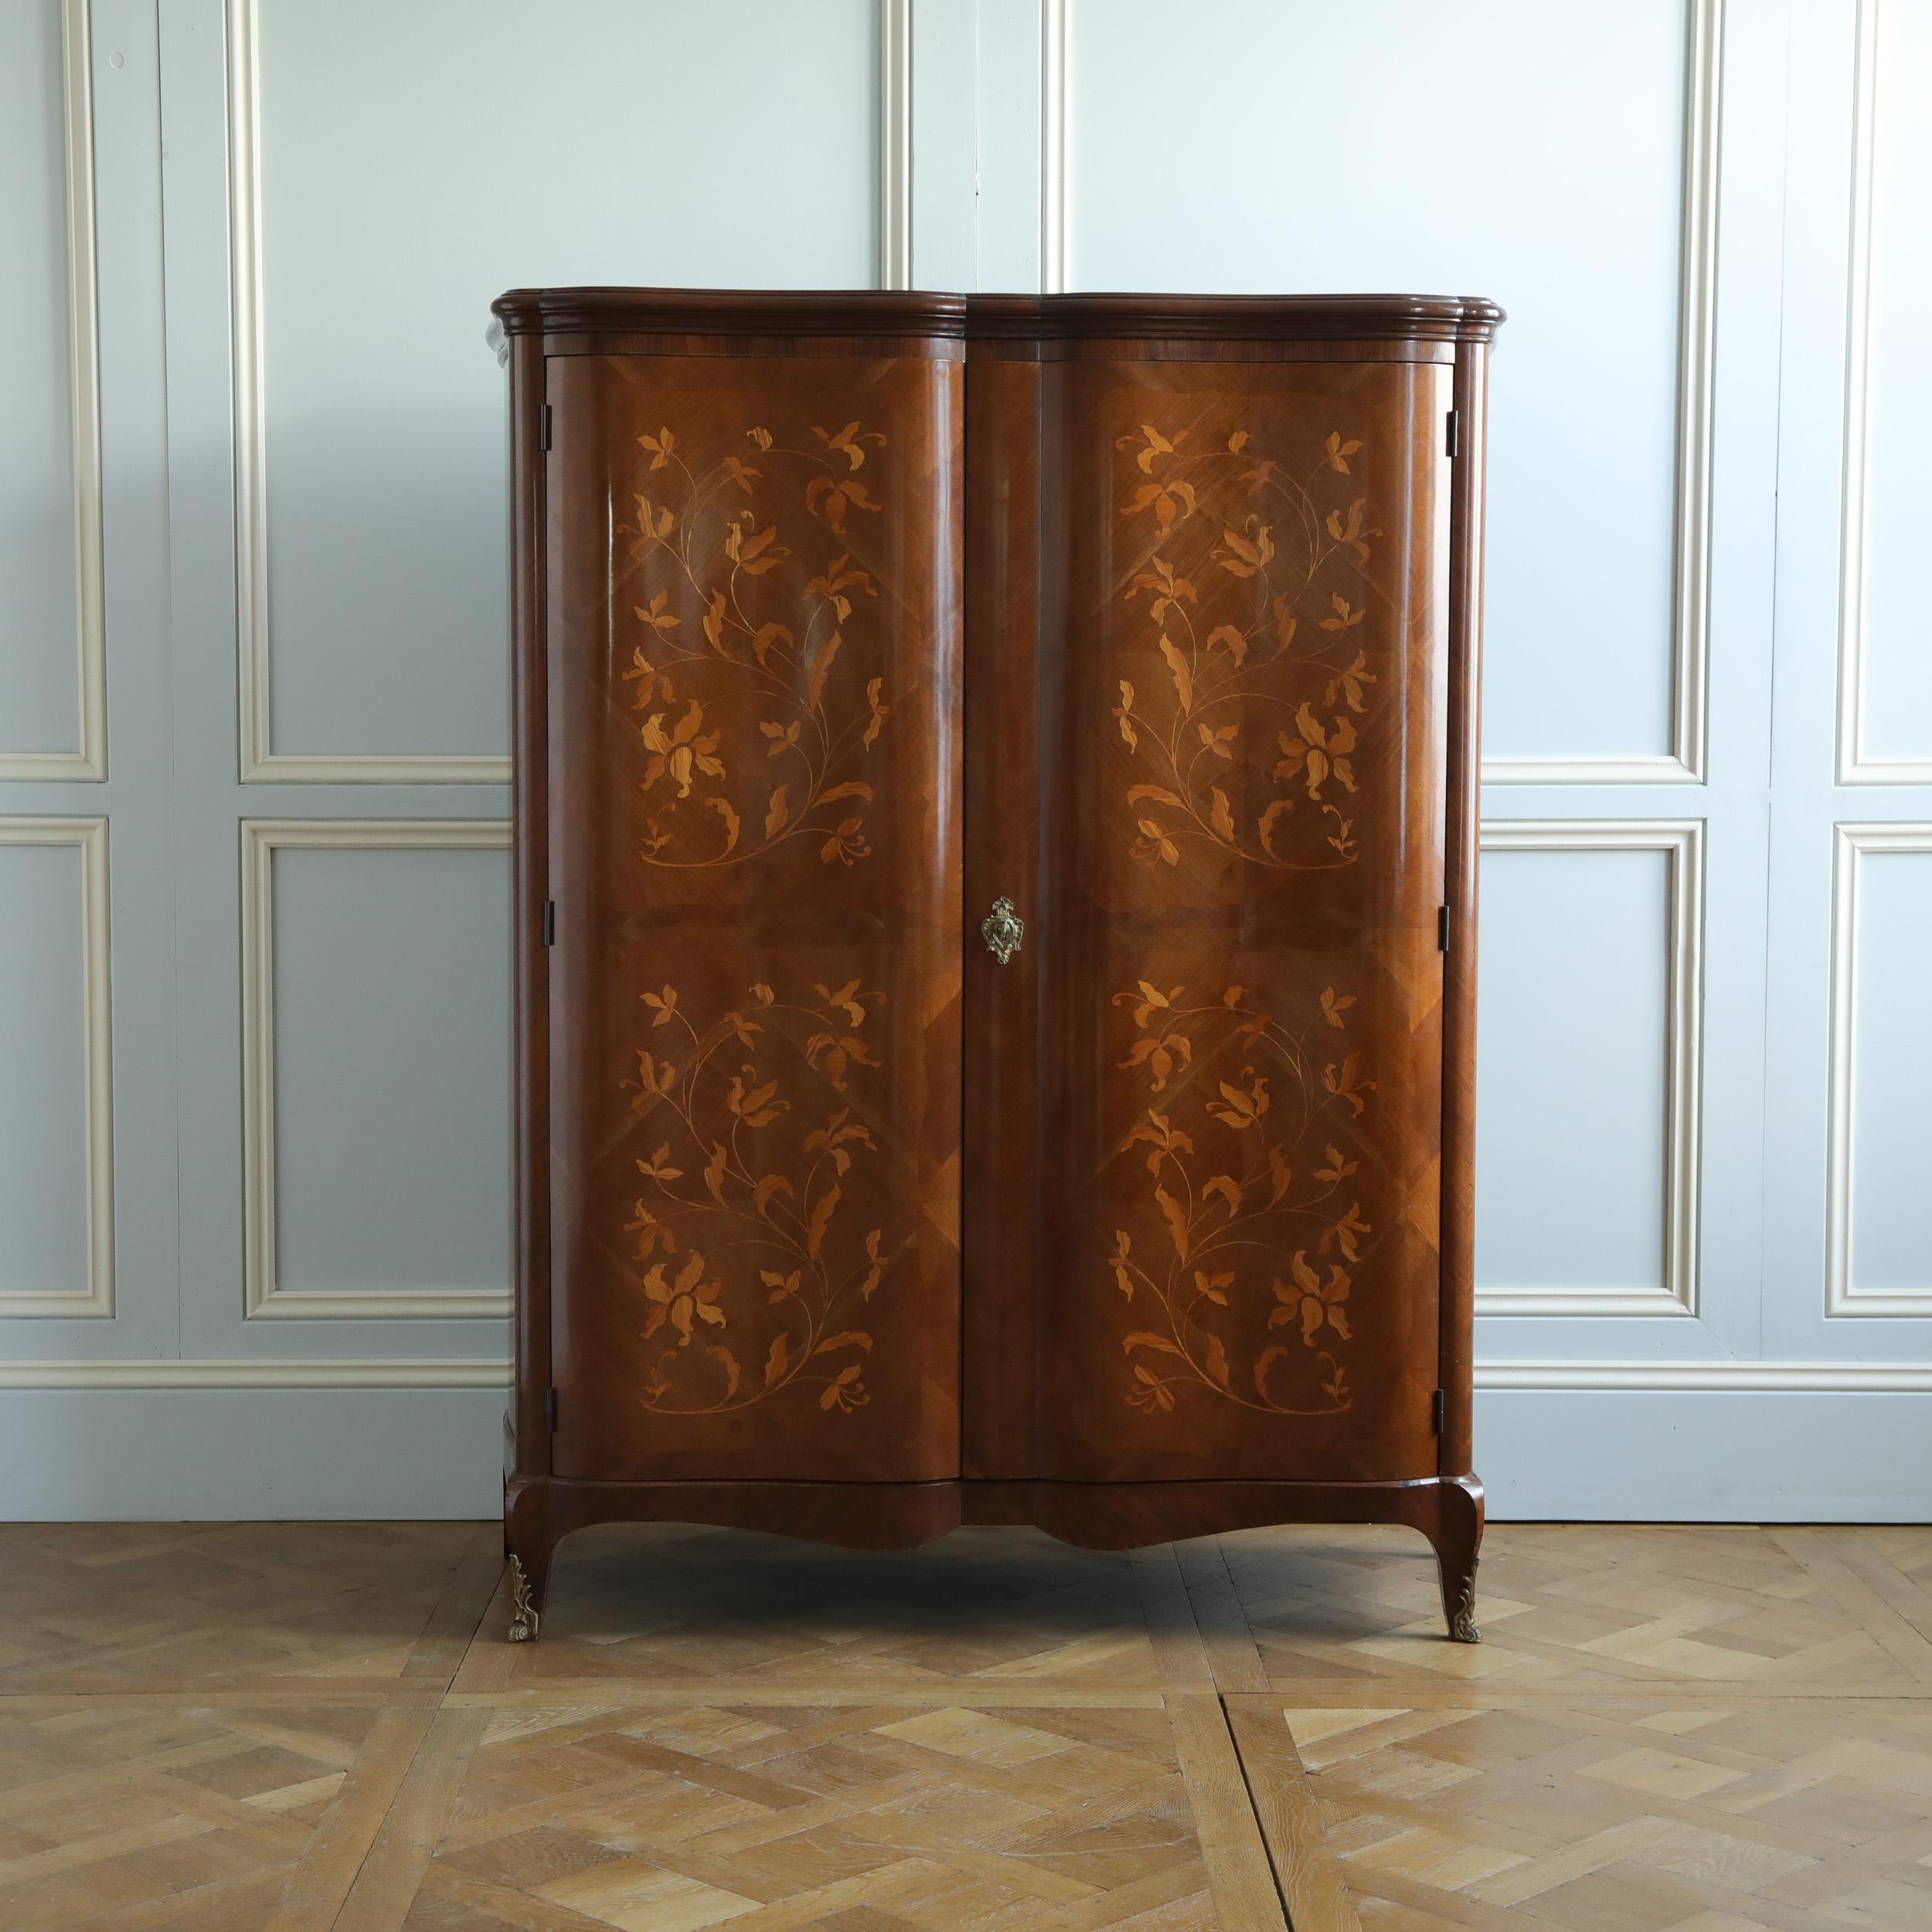 A pretty French, circa 1940's, serpentine style, two-door armoire with book-matched kingwood veneer work, featuring a striking design of inlaid floral marquetry on the doors and sides. This armoire has the benefit of being a neat size and height